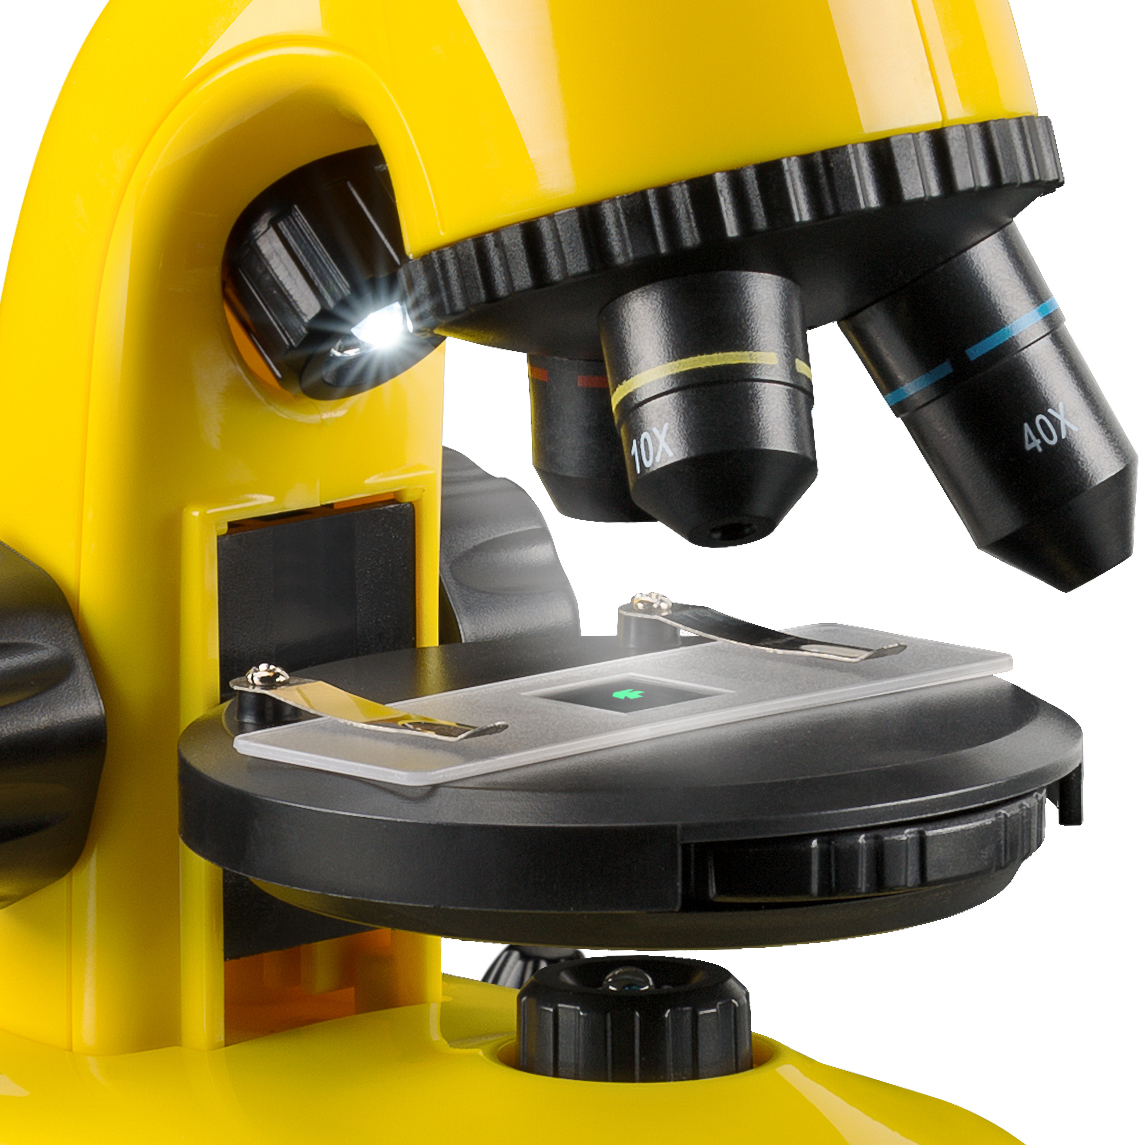 NATIONAL GEOGRAPHIC Biolux Student Microscope-Set